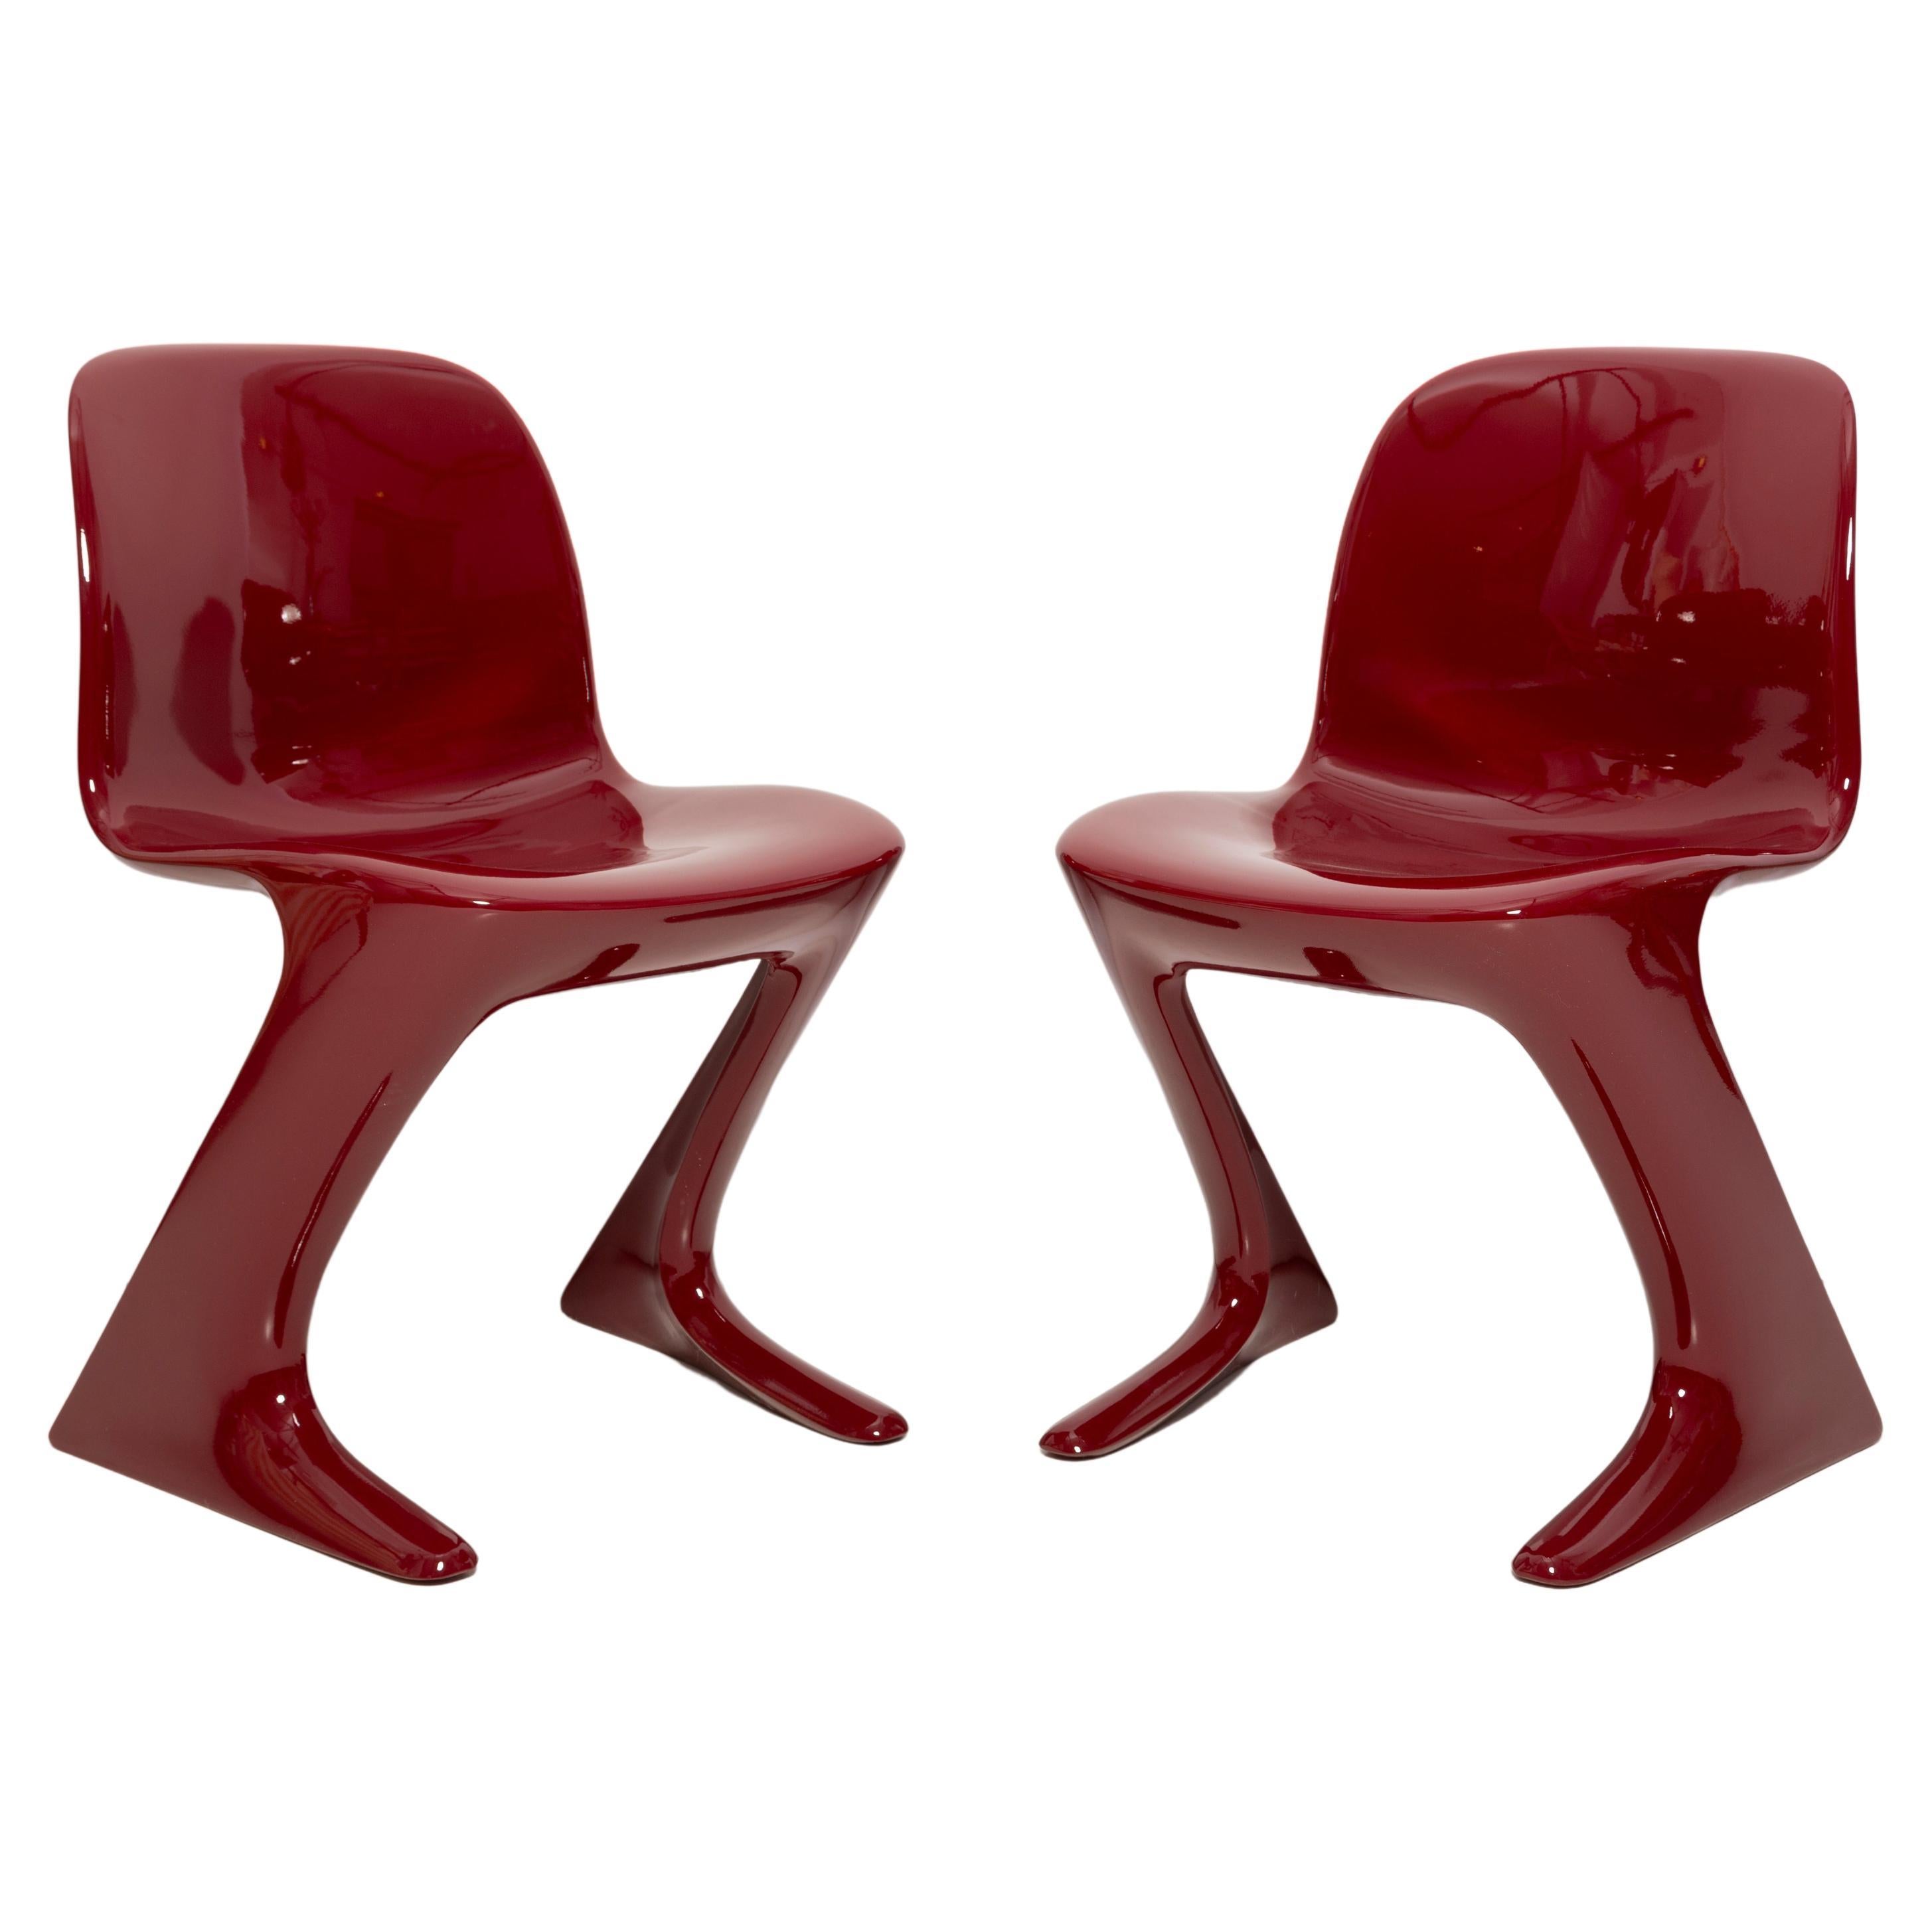 Pair of Dark Red Wine Kangaroo Chairs Designed by Ernst Moeckl, Germany, 1968 For Sale